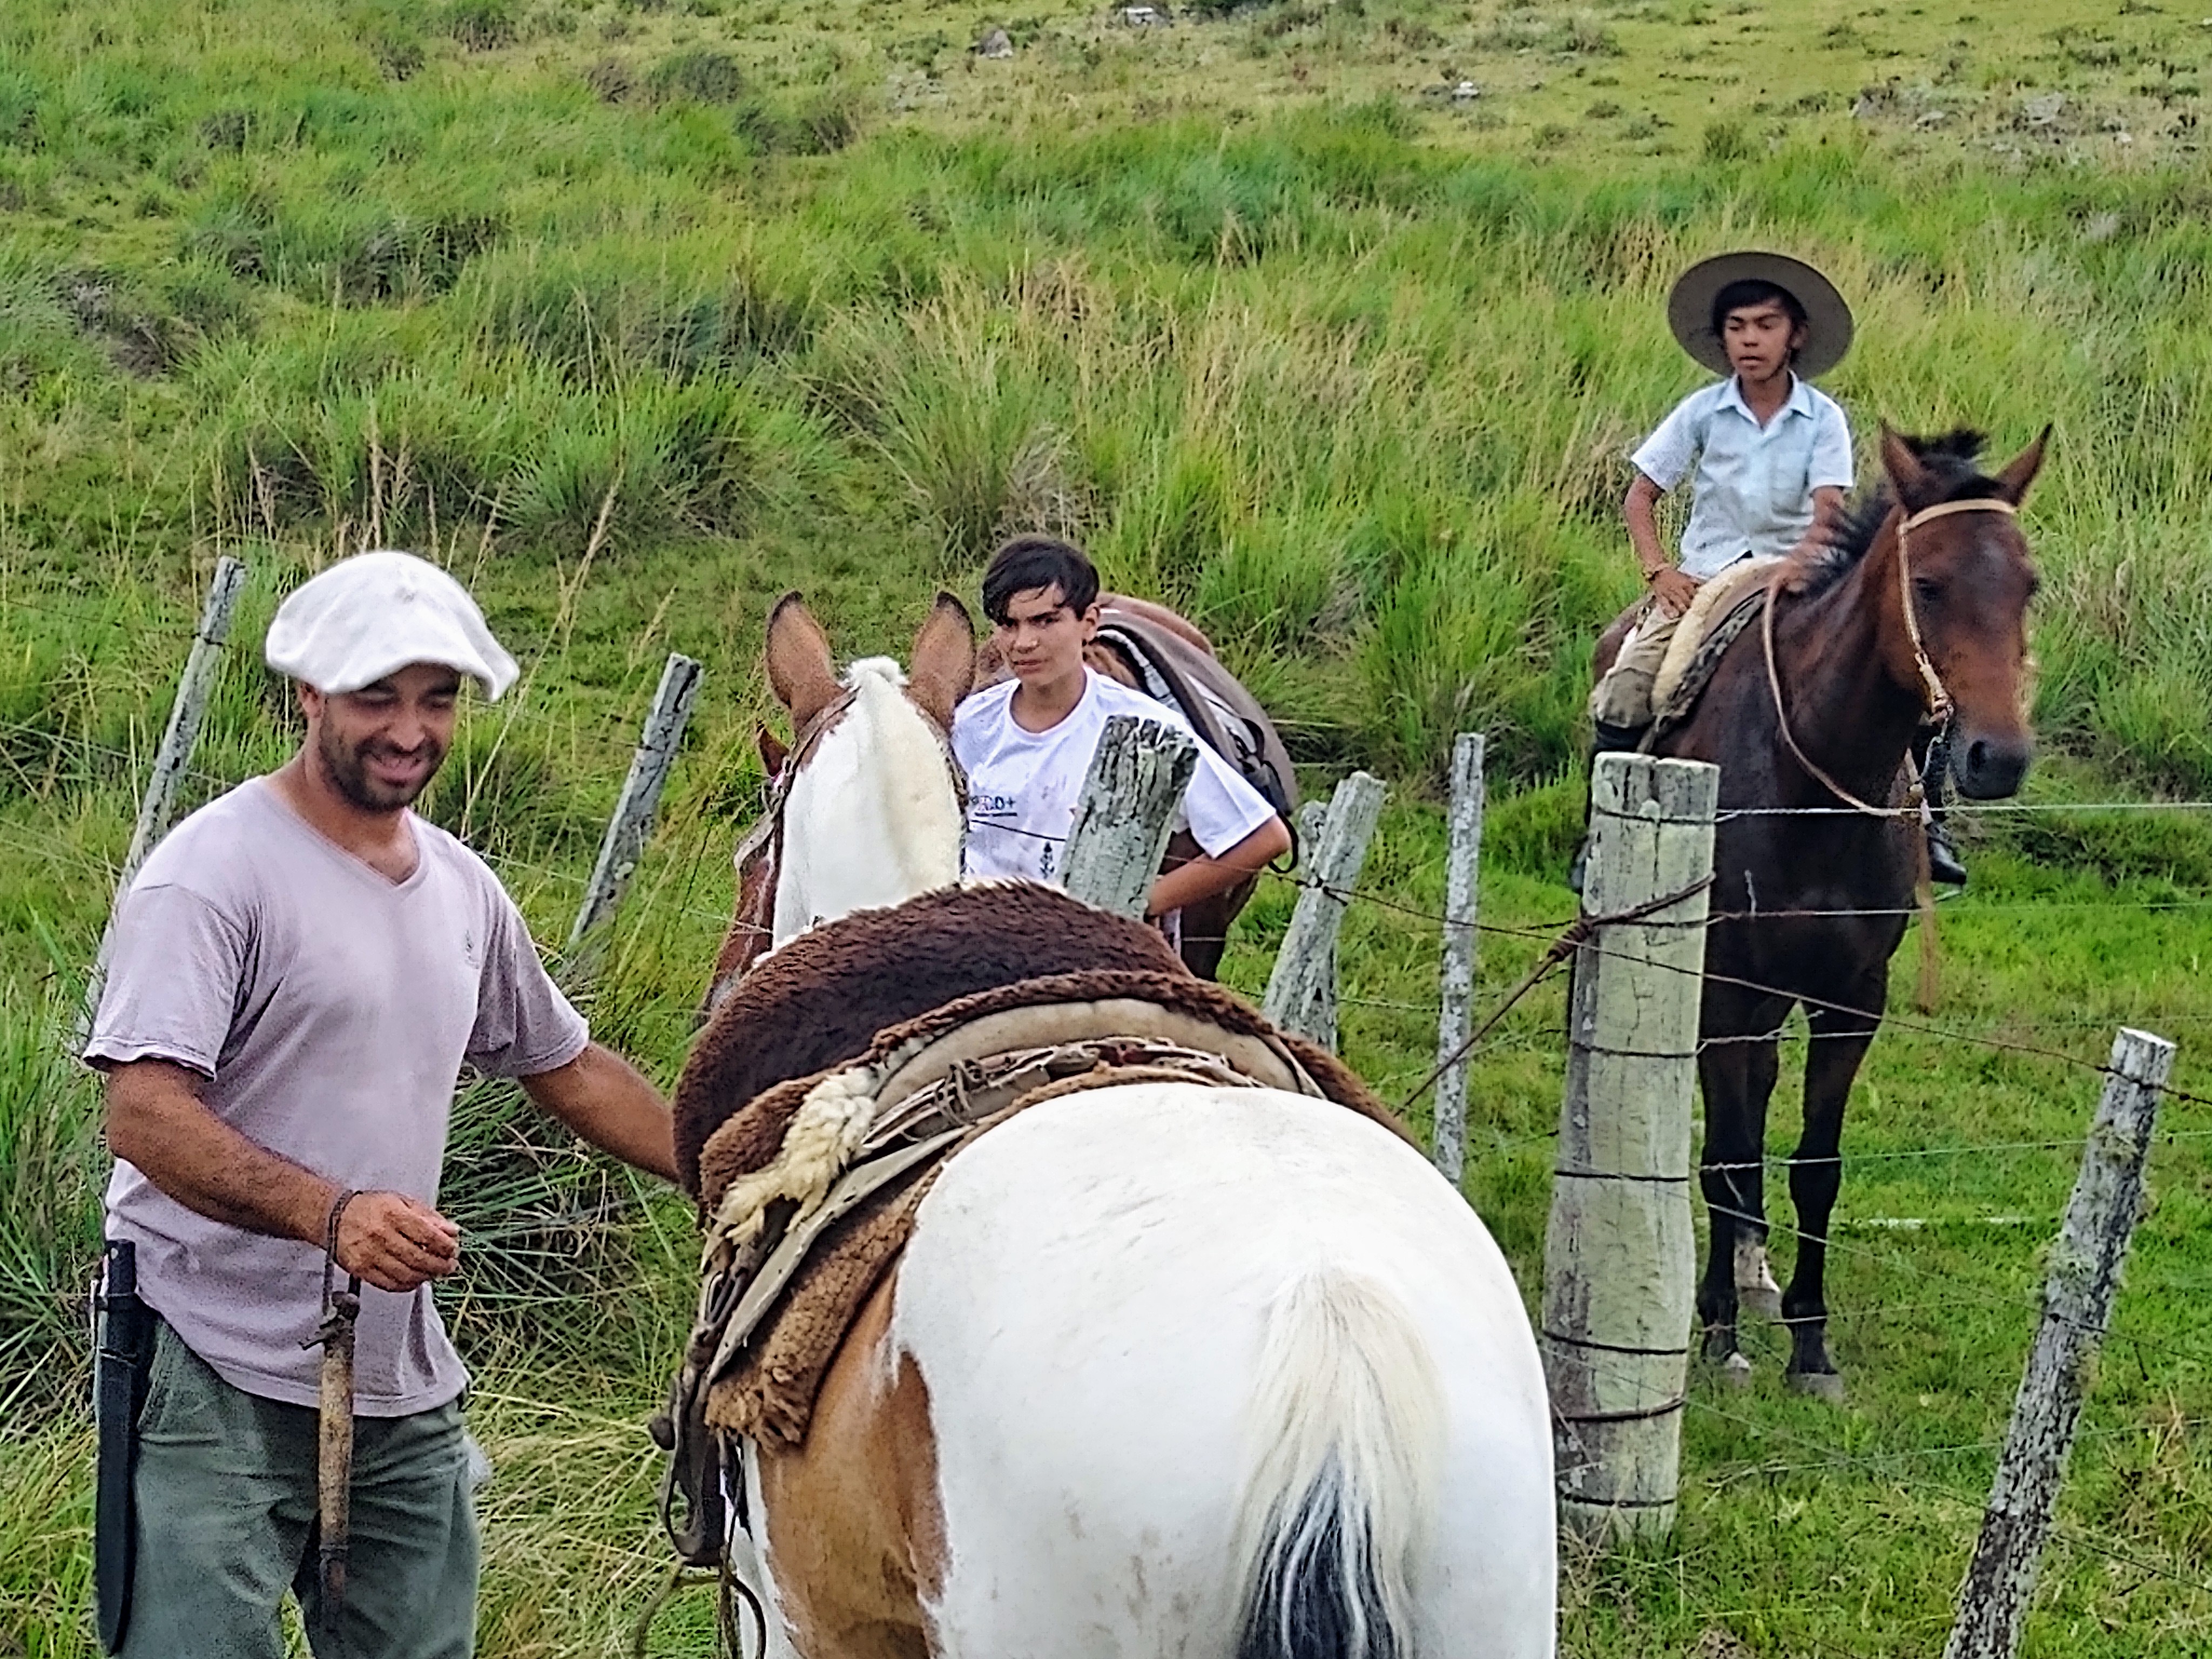 A man standing next to a horse near two young men, one on horseback and one standing on the ground by a fence.